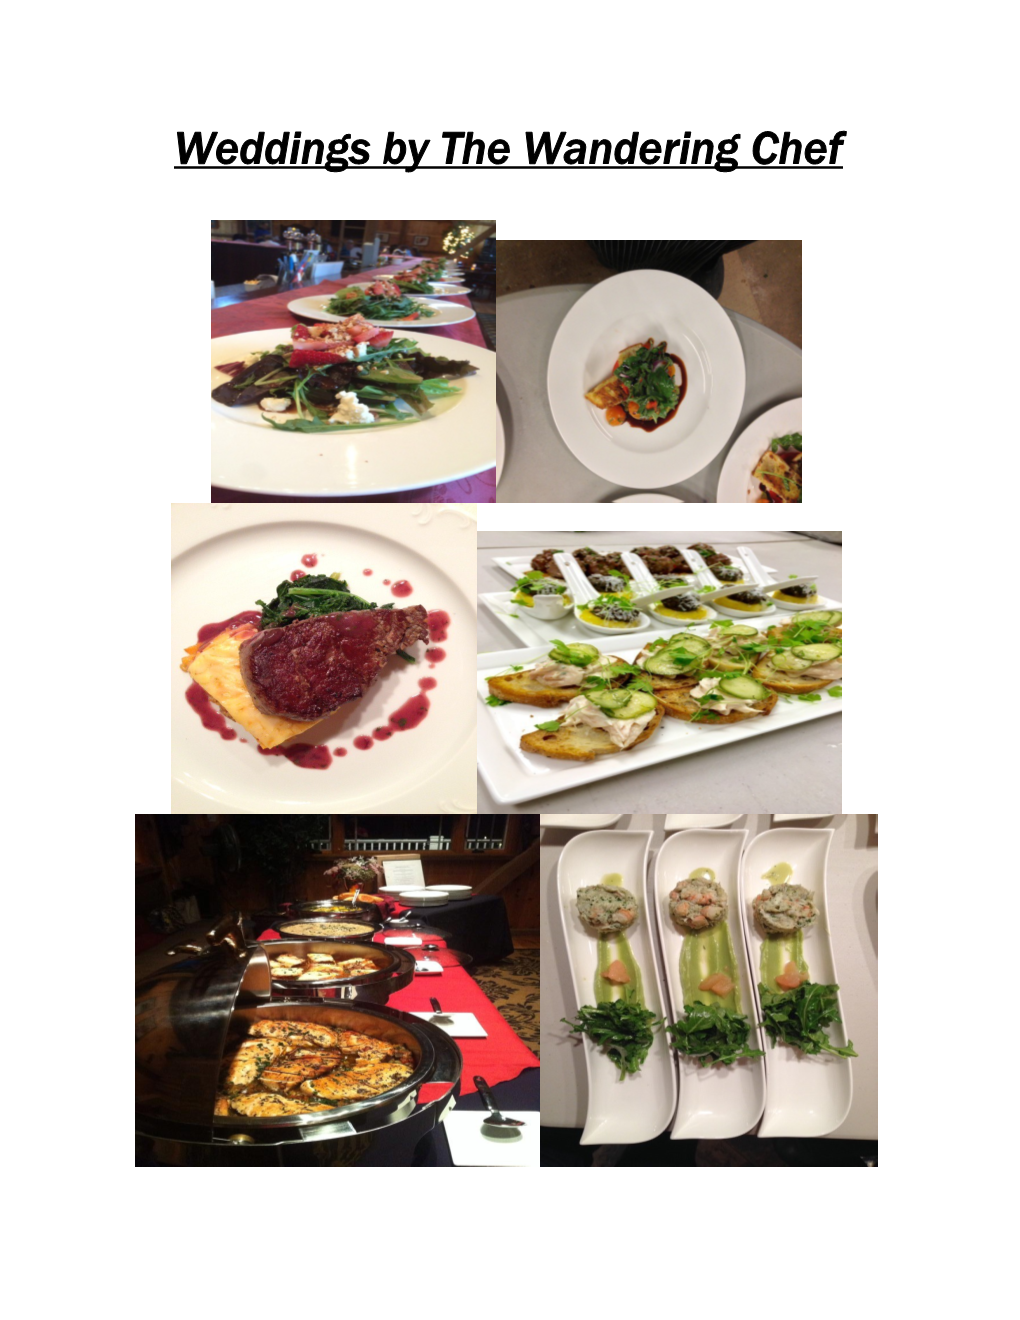 Weddings by the Wandering Chef